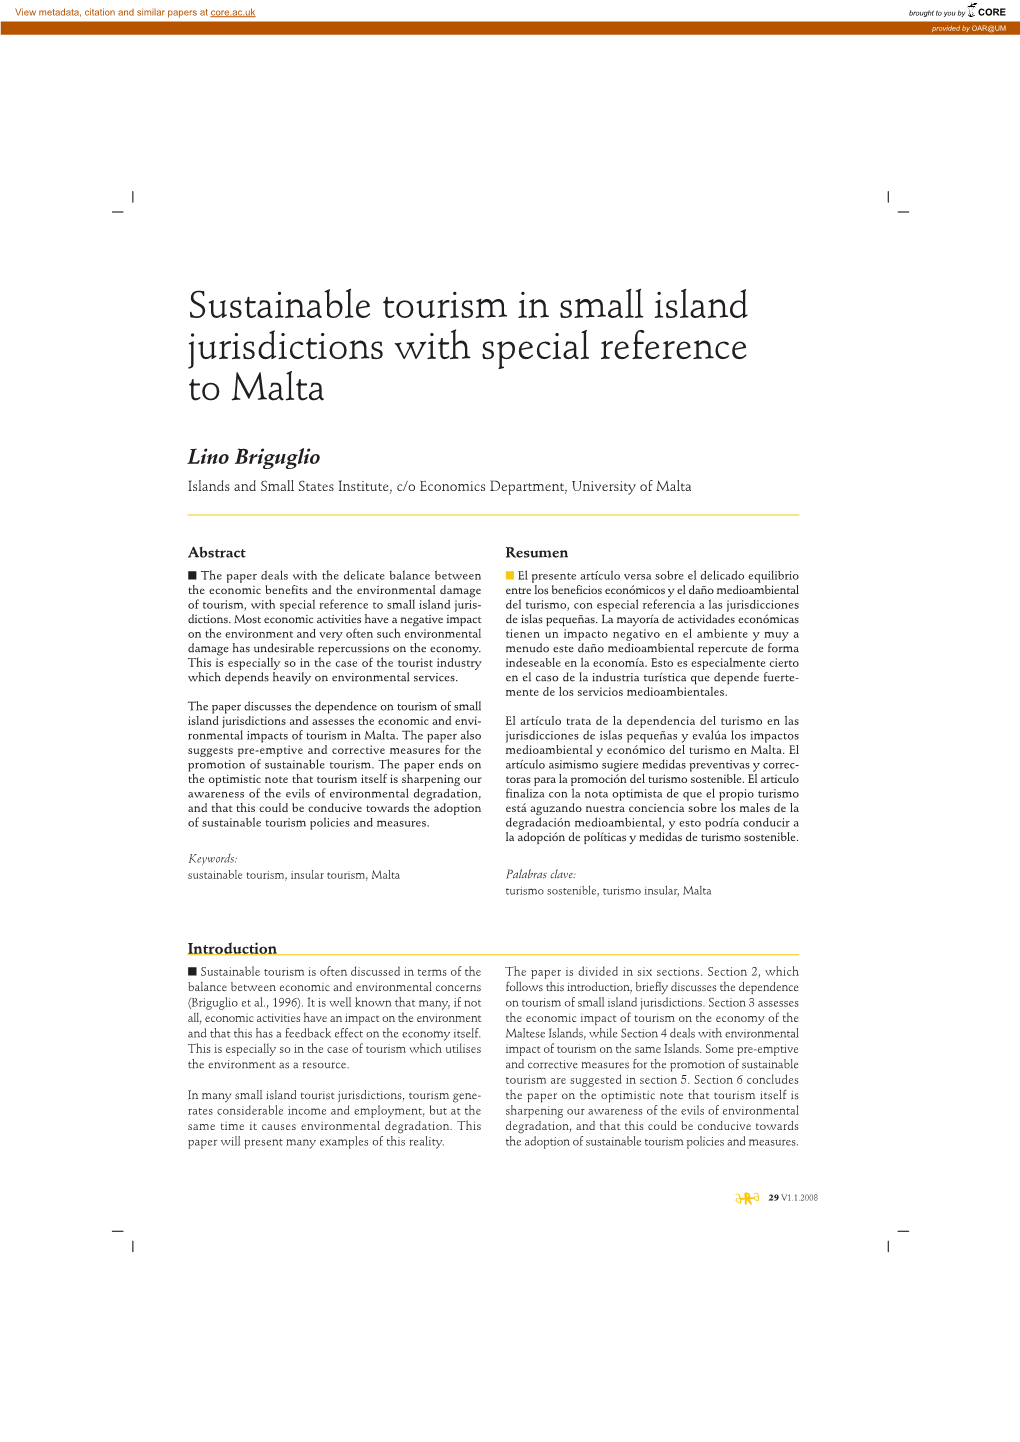 Sustainable Tourism in Small Island Jurisdictions with Special Reference to Malta